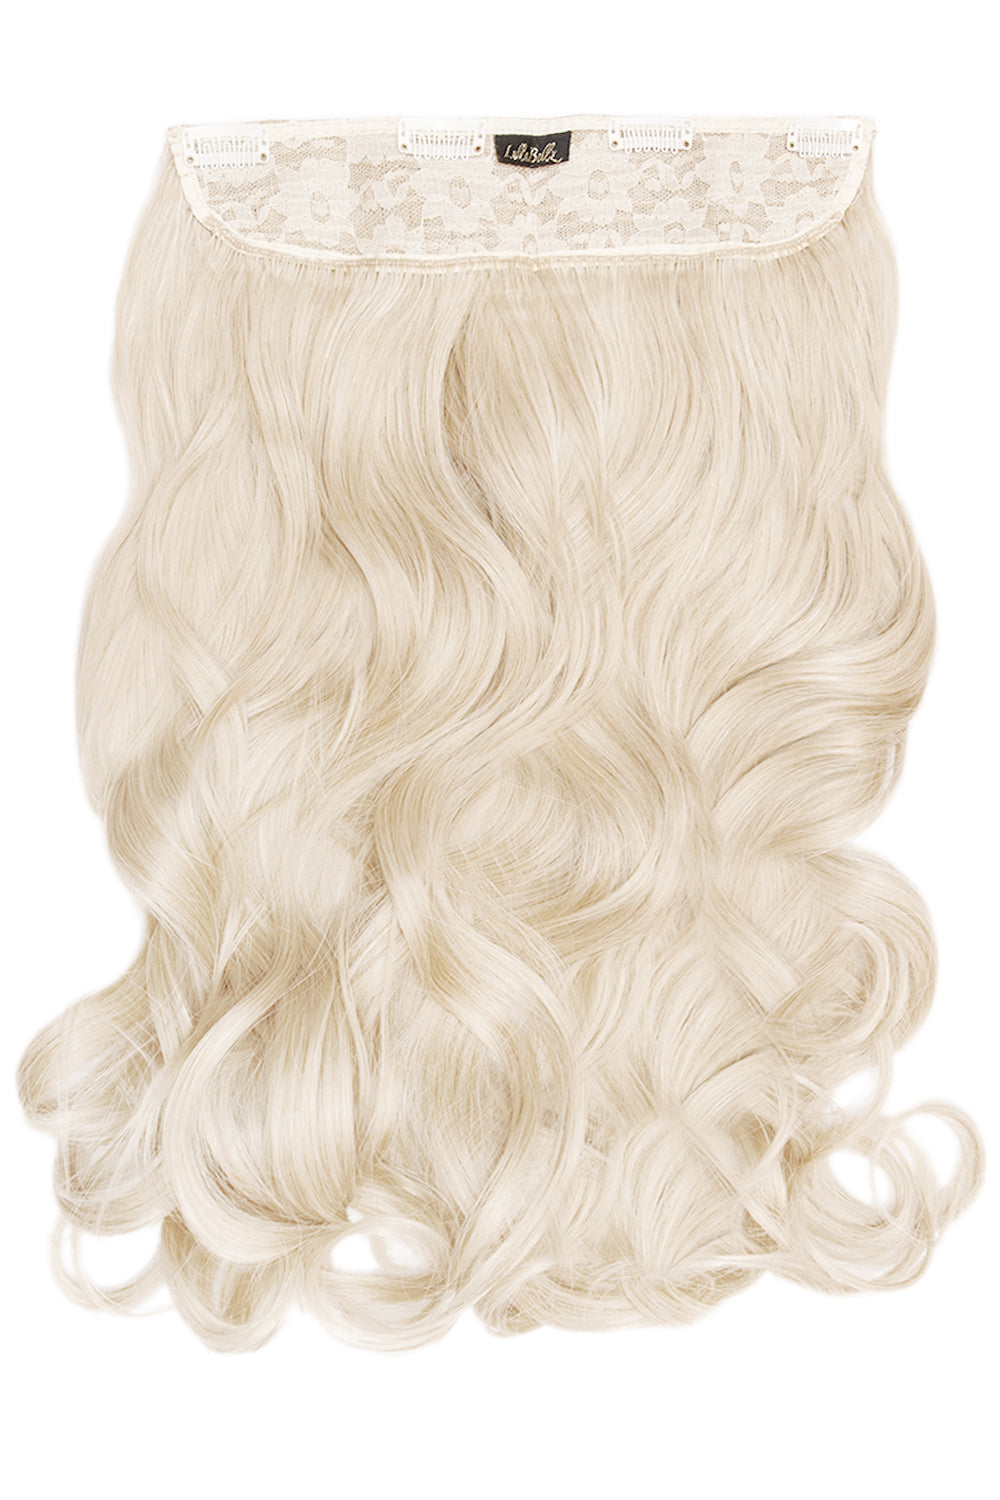 Thick 20" 1 Piece Curly Clip In Hair Extensions - LullaBellz - Bleach Blonde